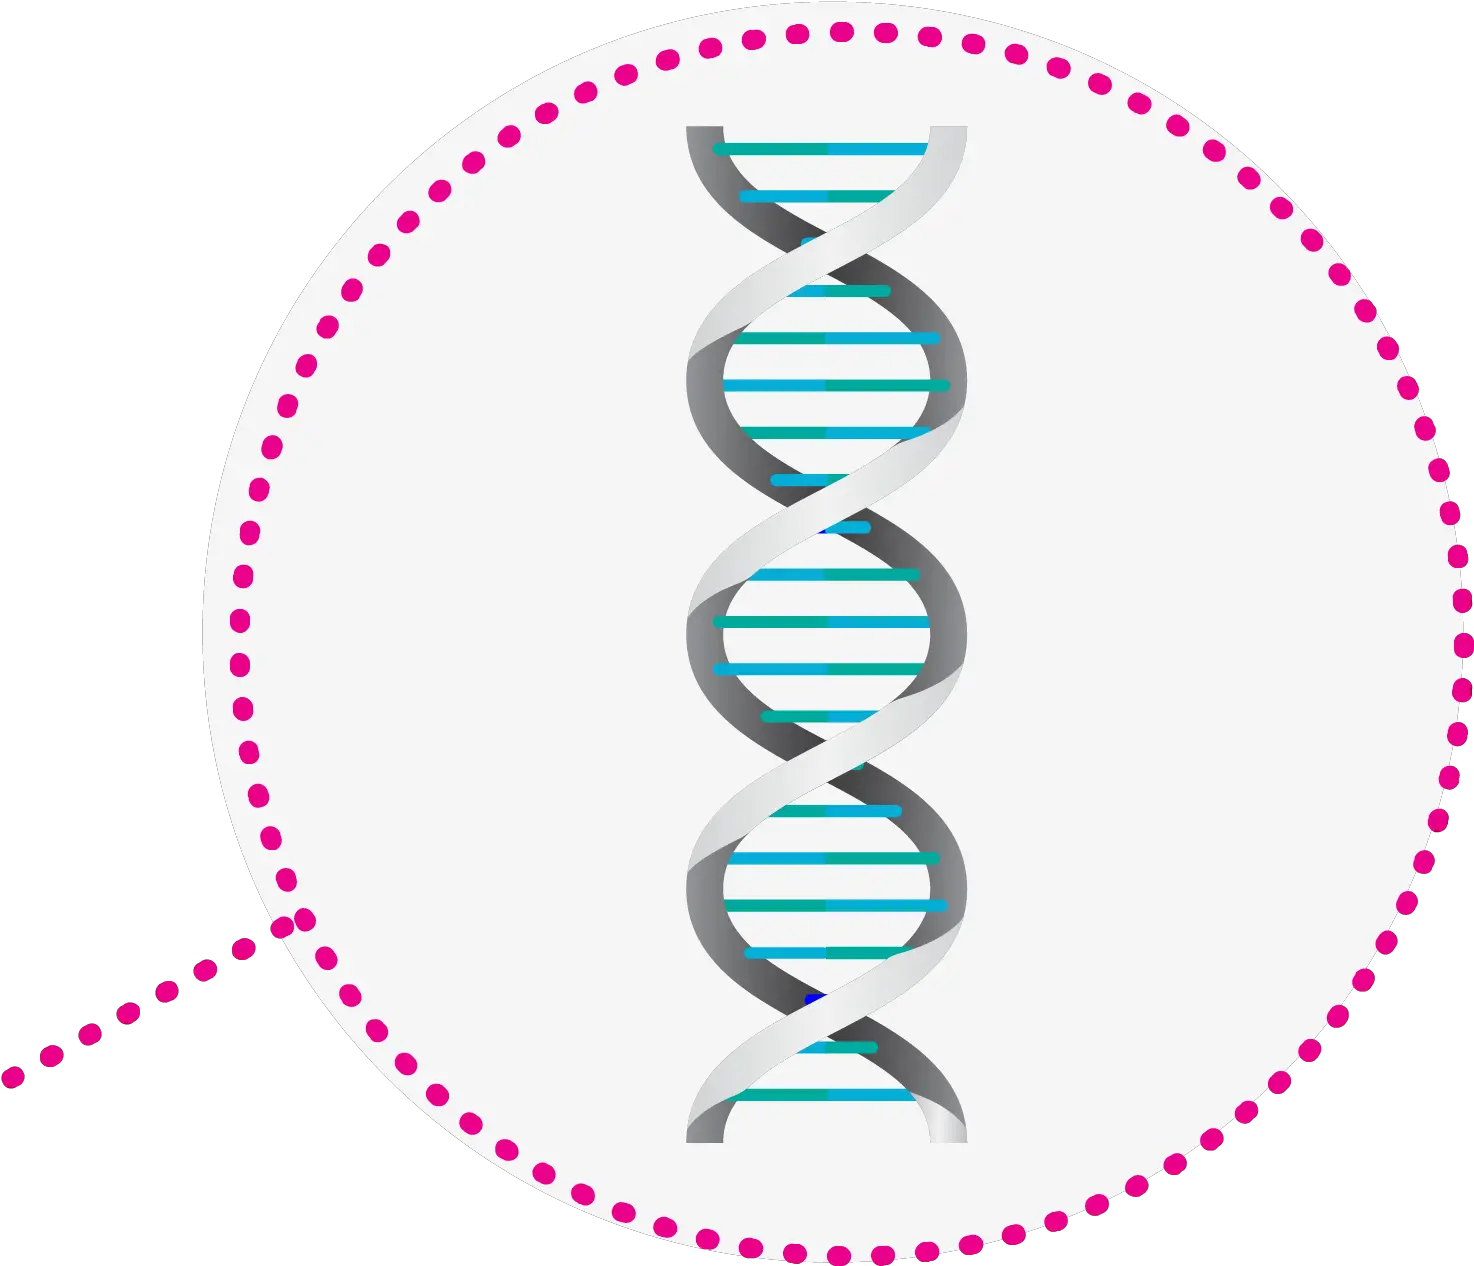 What You Need To Know About Testing For Tumor Mutations In Png Dna Icon No Background